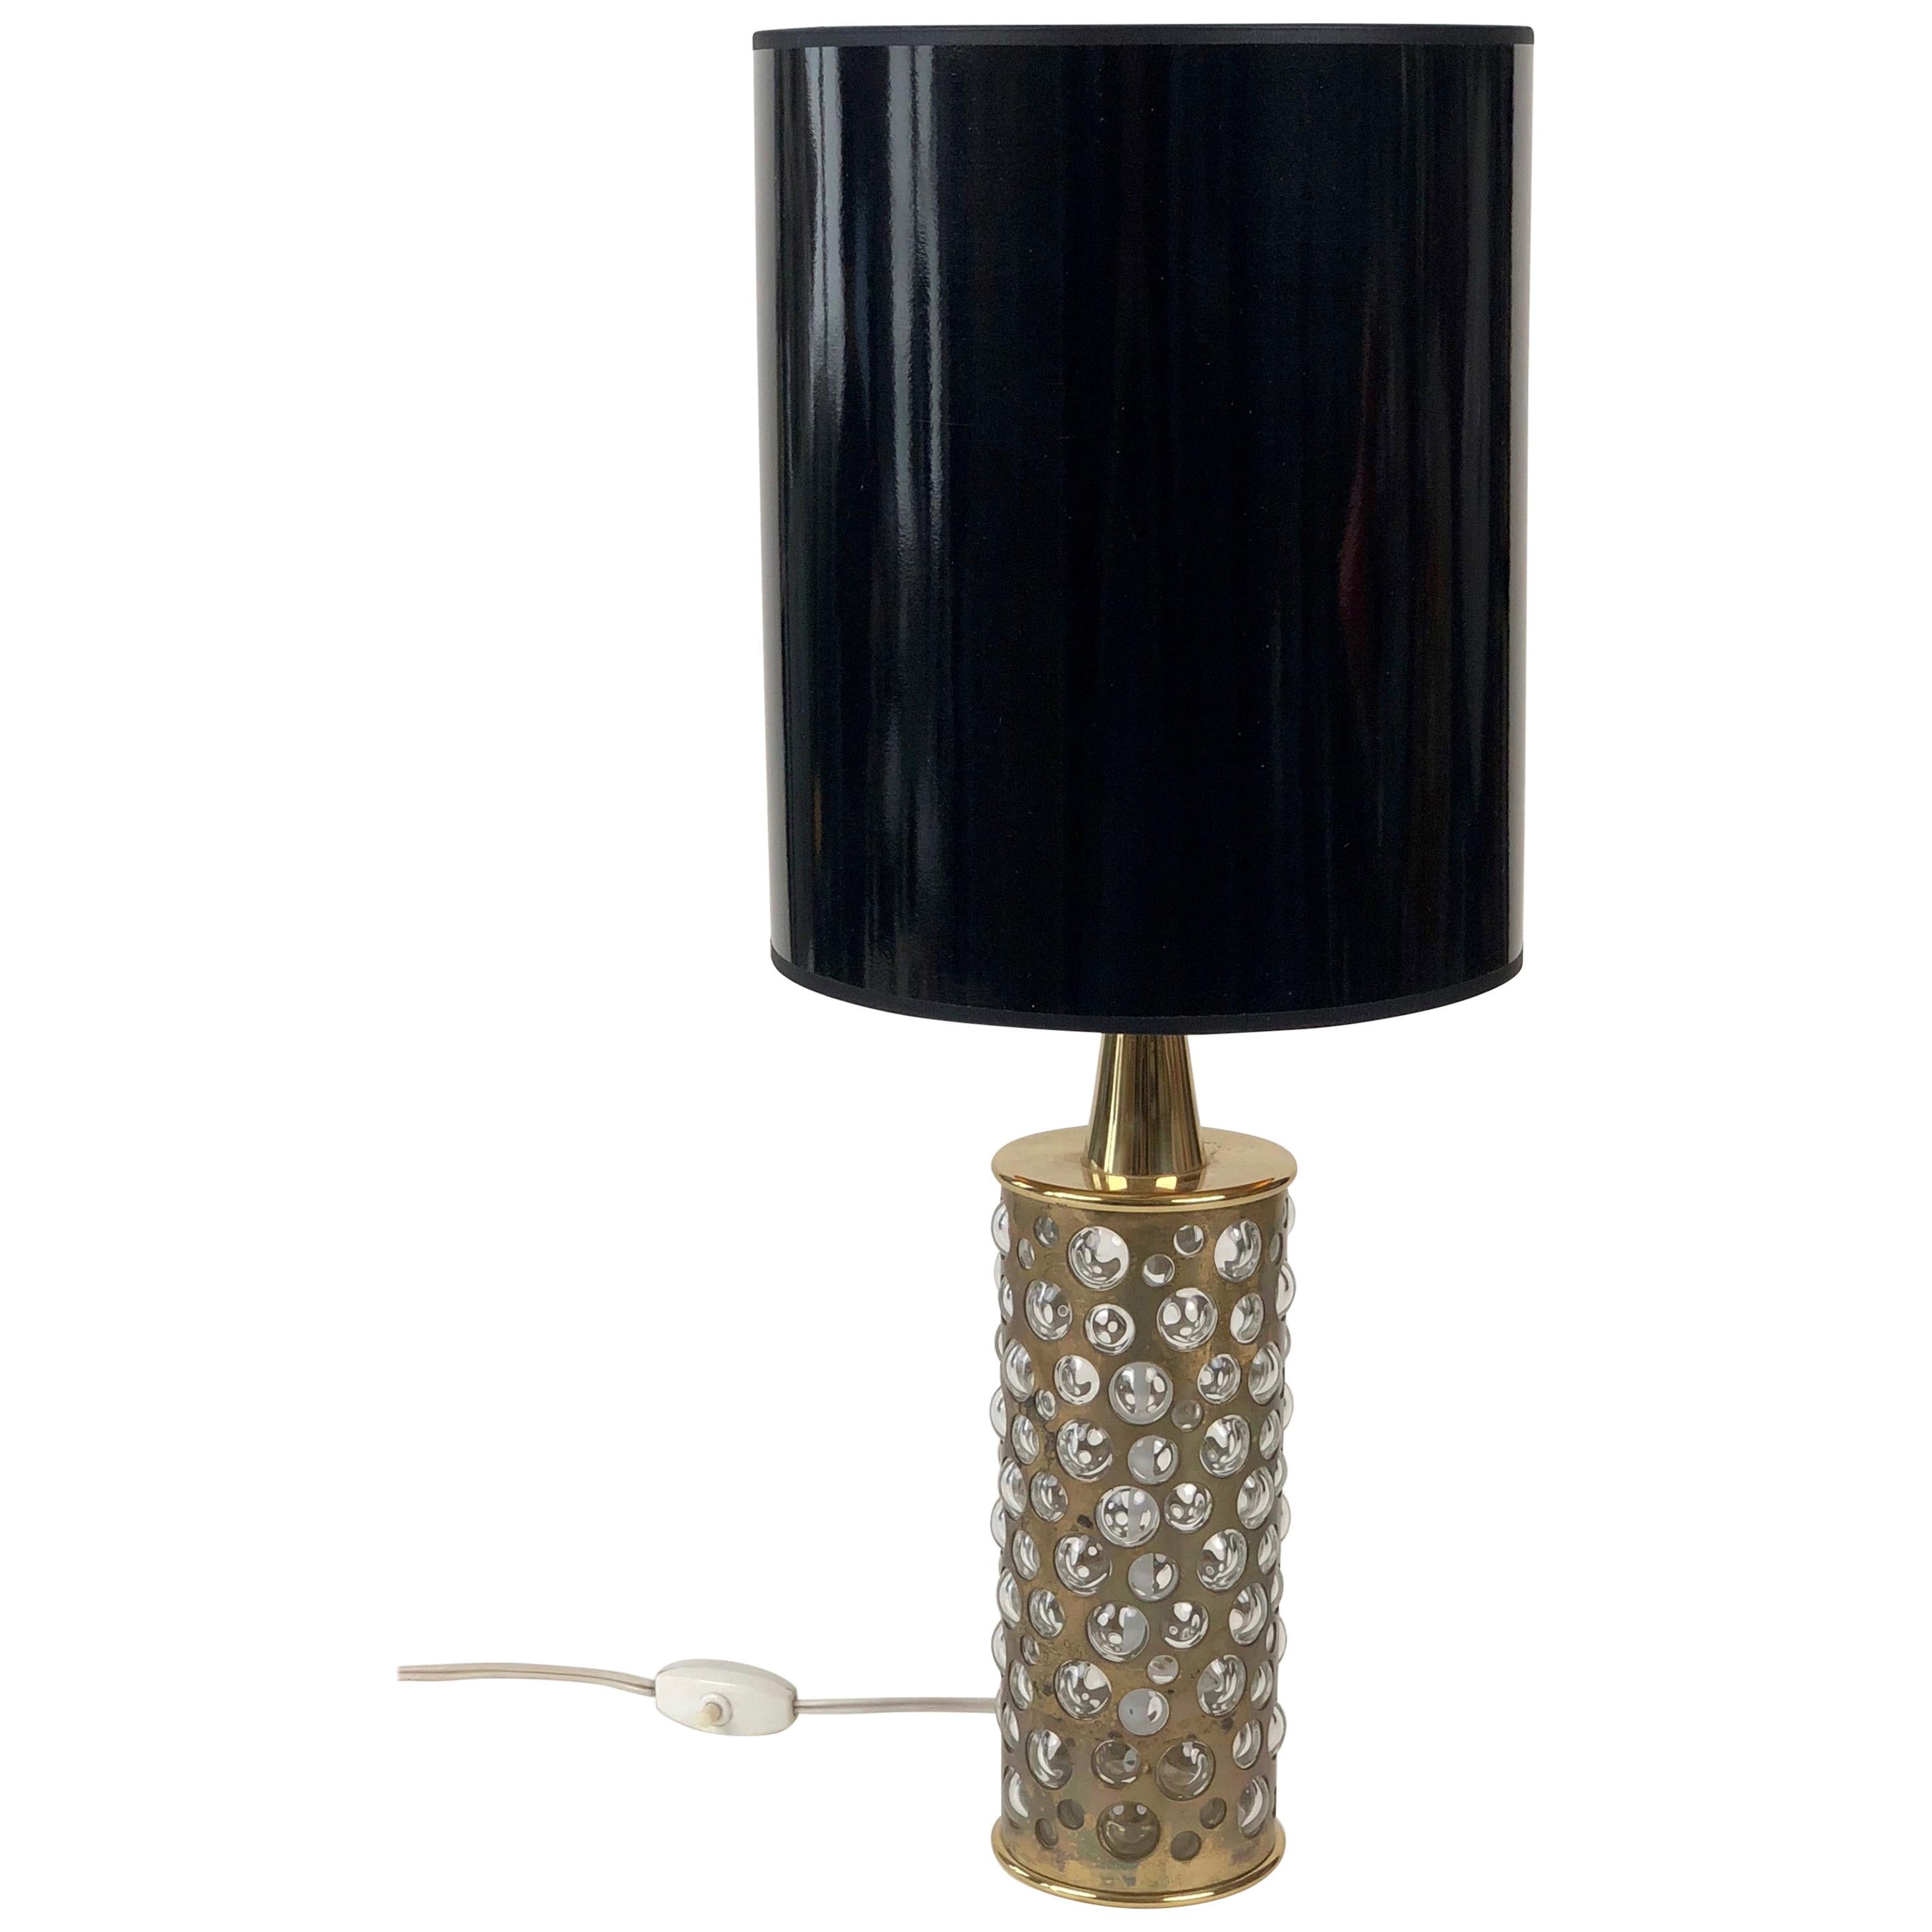 Midcentury Table Lamp from Rupert Nikoll, Patinated Brass and Glass For Sale